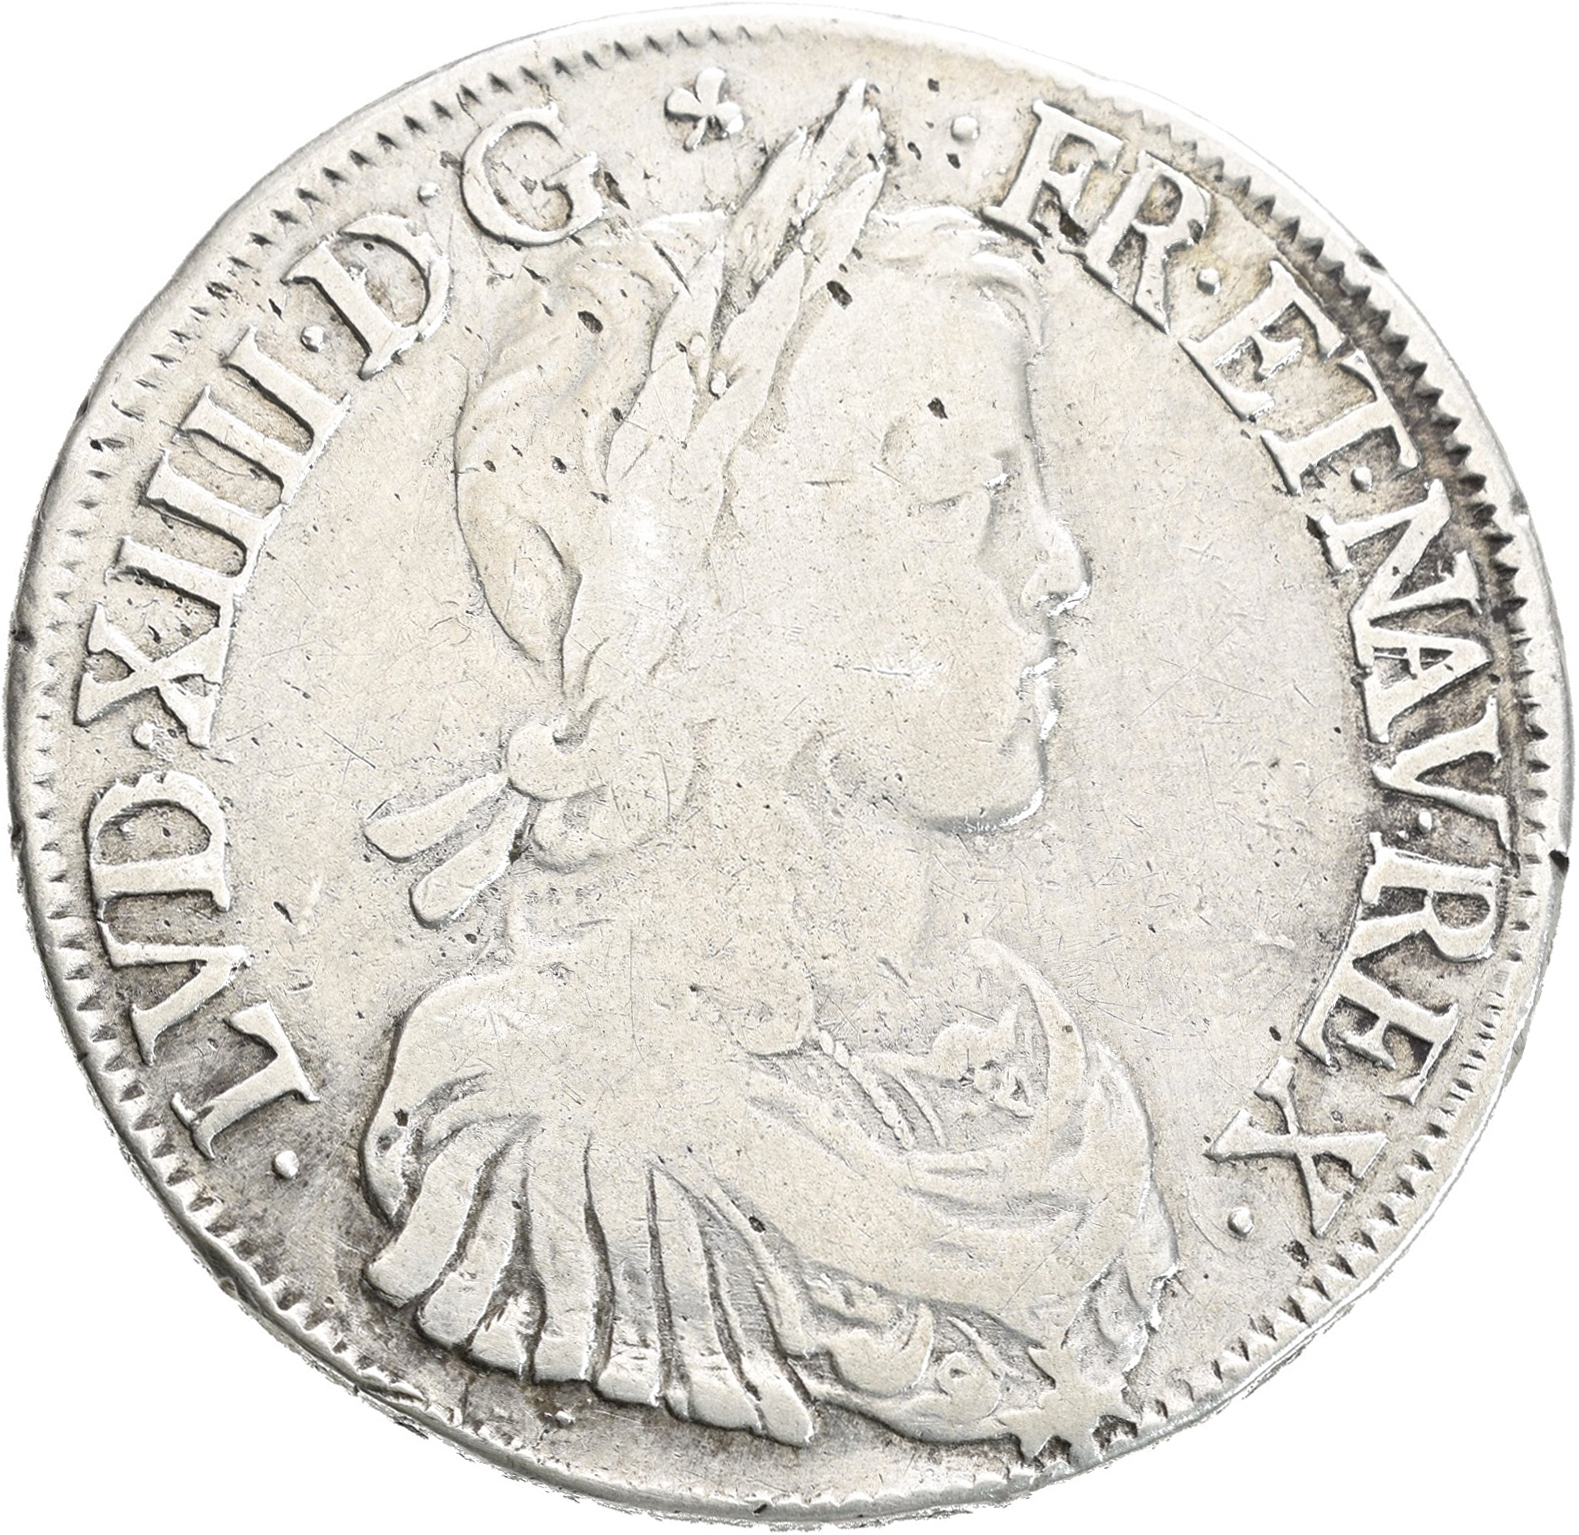 Lot 01150 - Frankreich | Europa  -  Auktionshaus Christoph Gärtner GmbH & Co. KG 54th AUCTION - Day 1 Coins & Banknotes